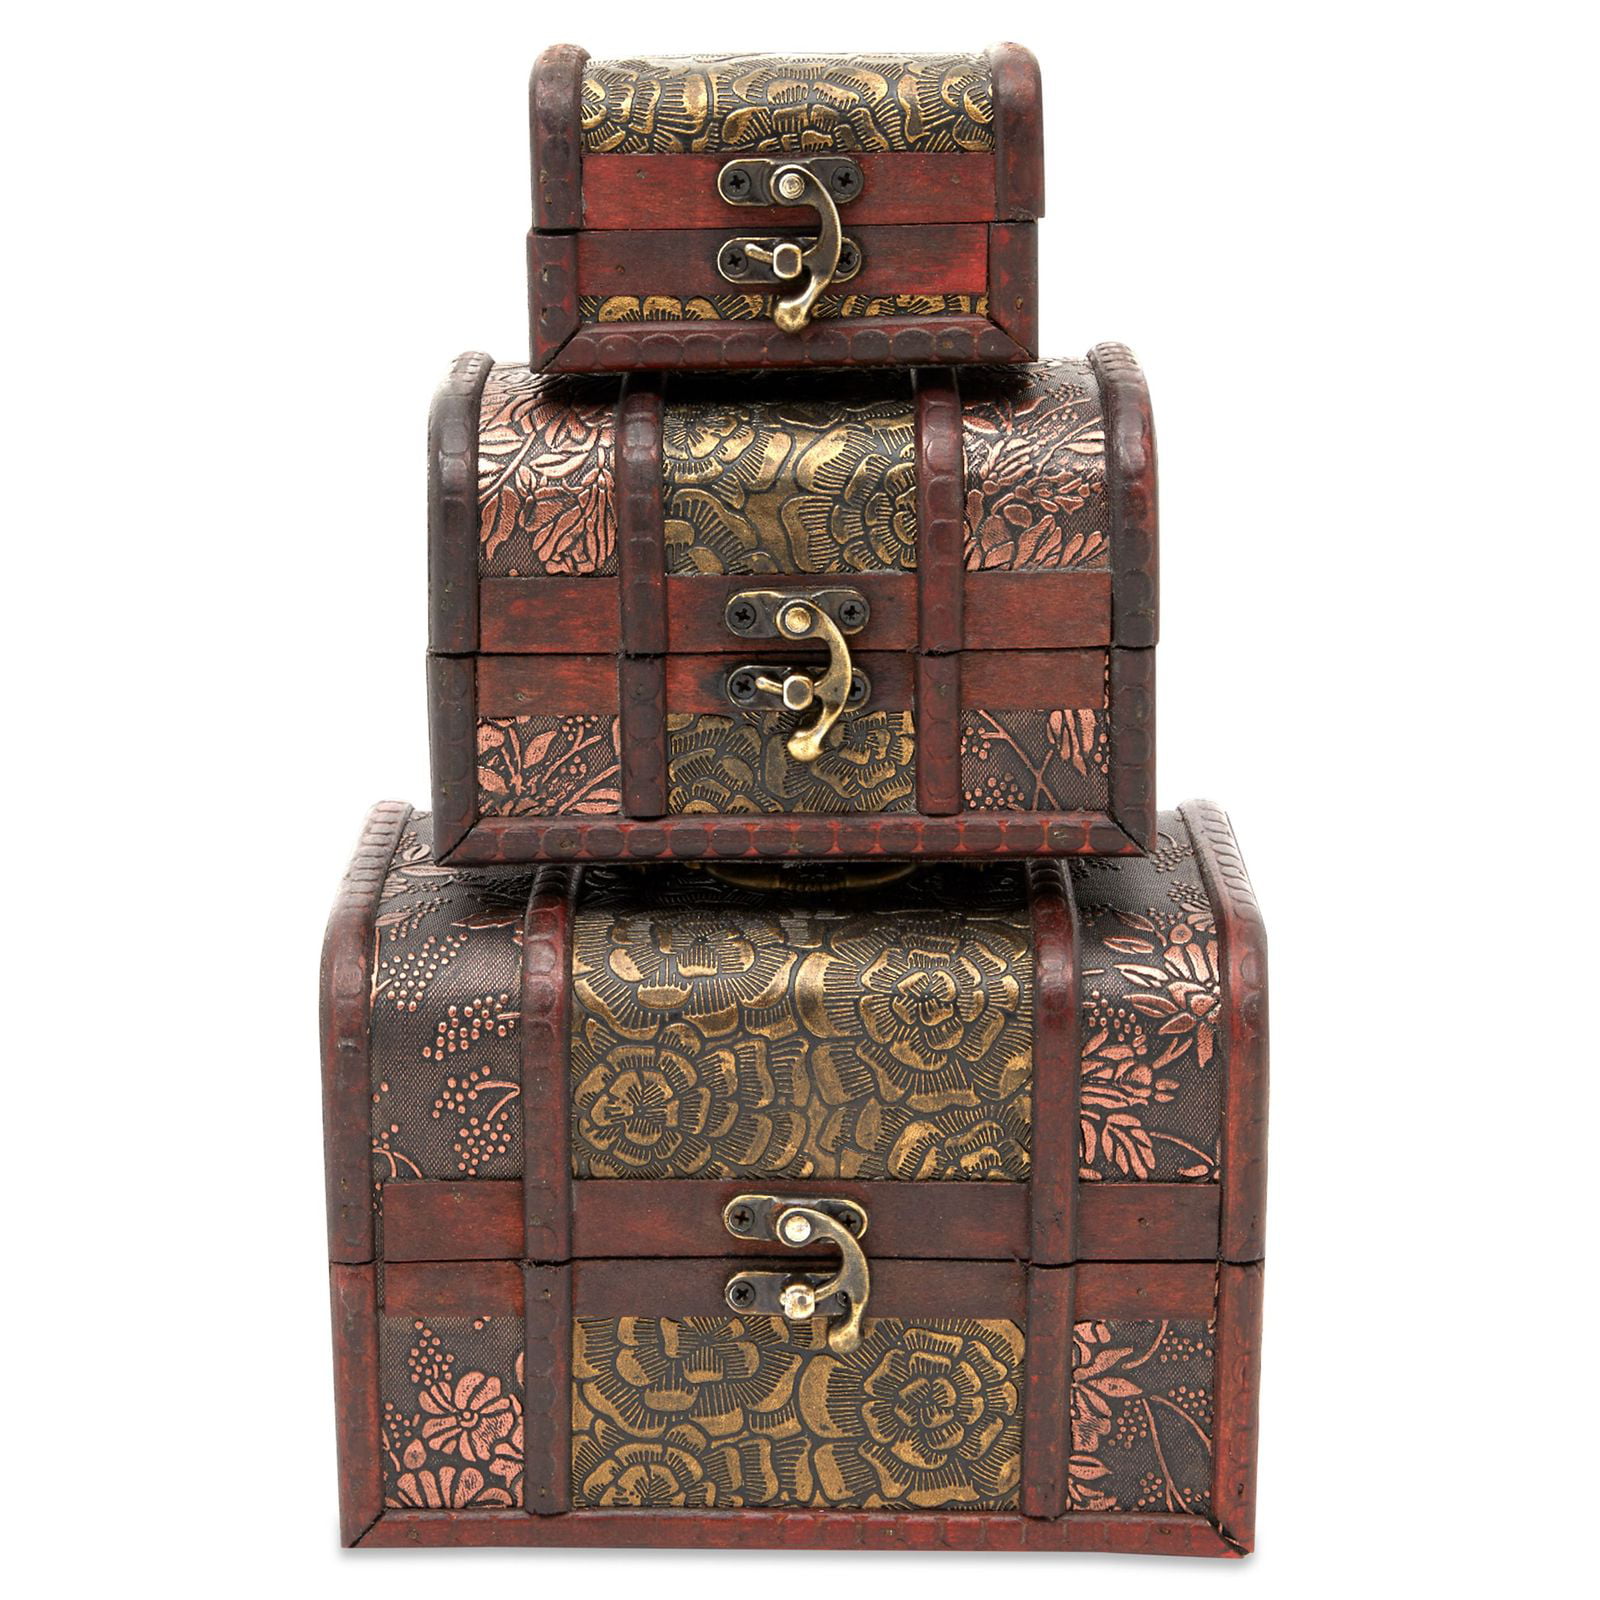 Vintage Wooden Storage Boxes Treasure Chest with Lock ^ Key for Jewelry Keepsake 